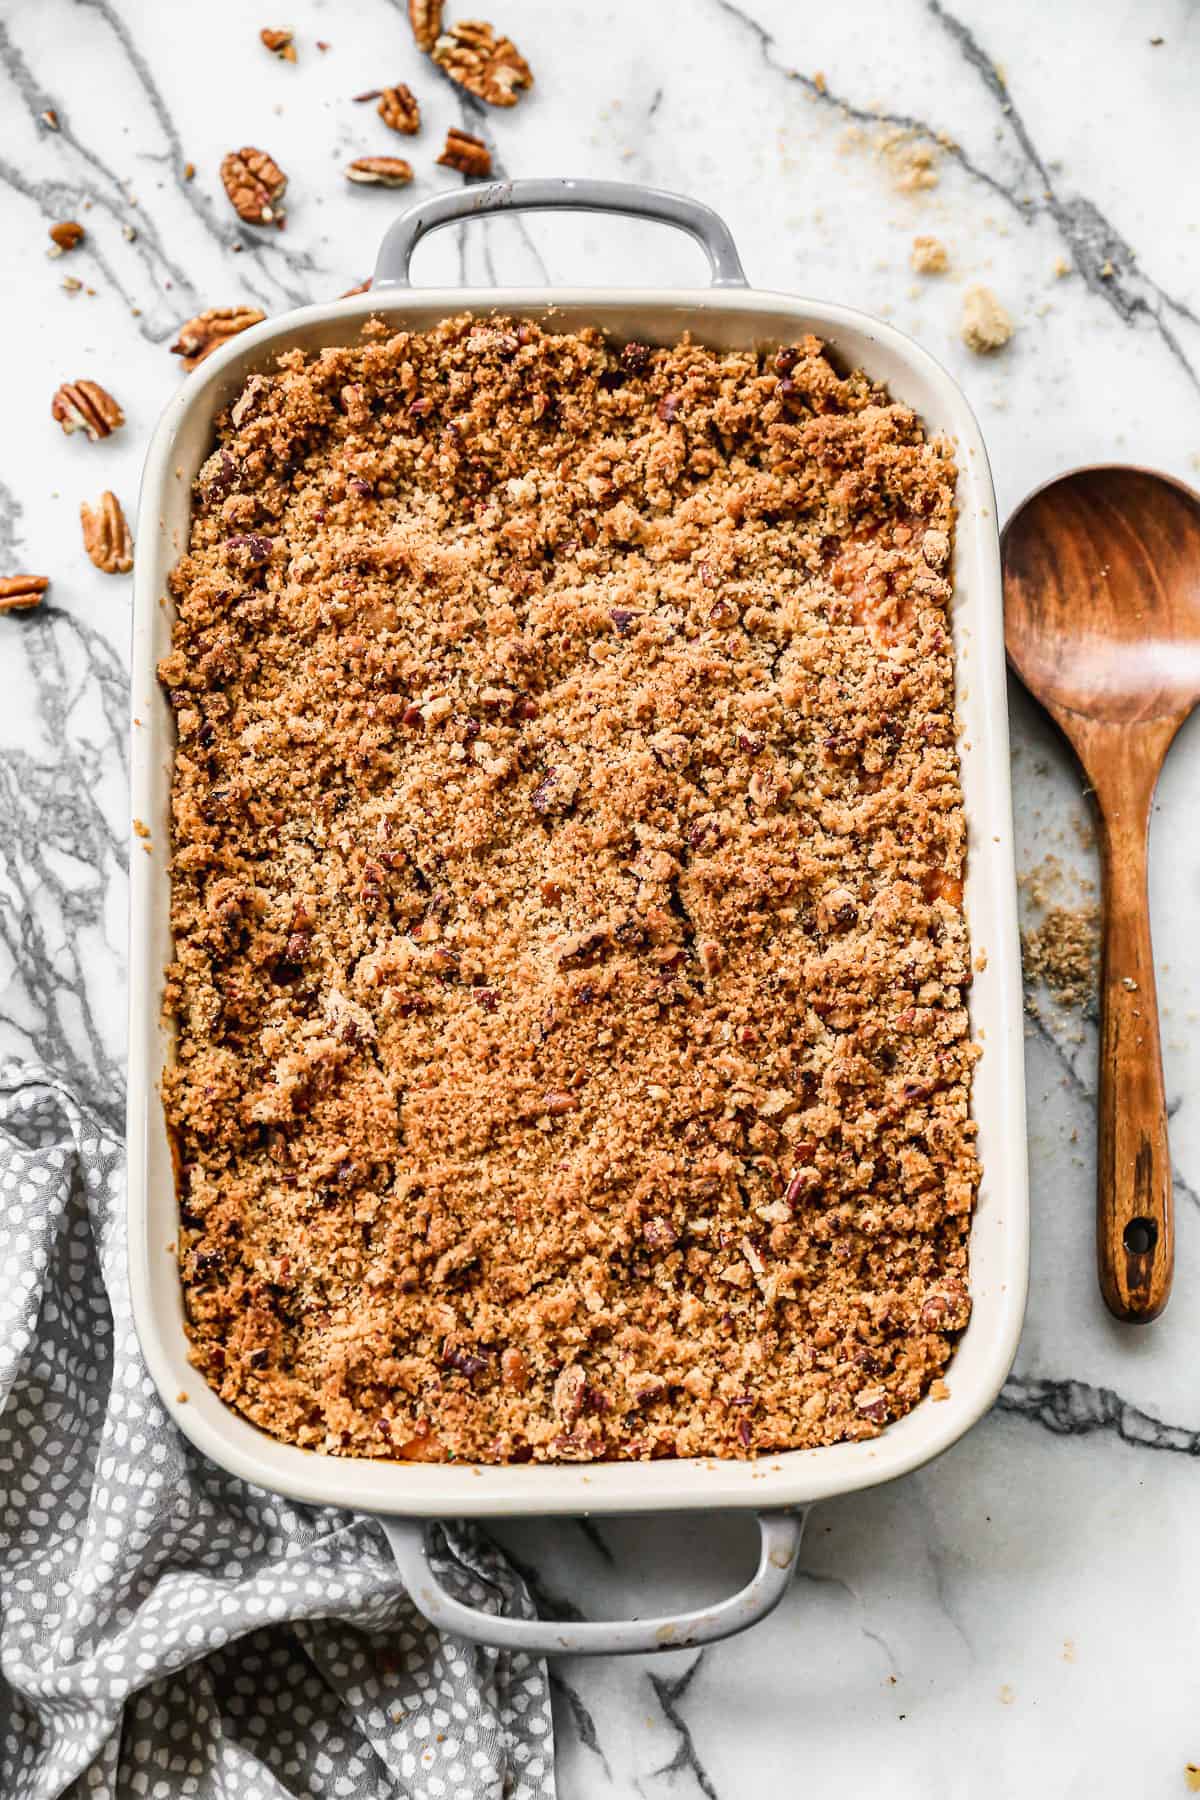 A Sweet Potato Casserole with pecan topping, golden brown and ready to serve.